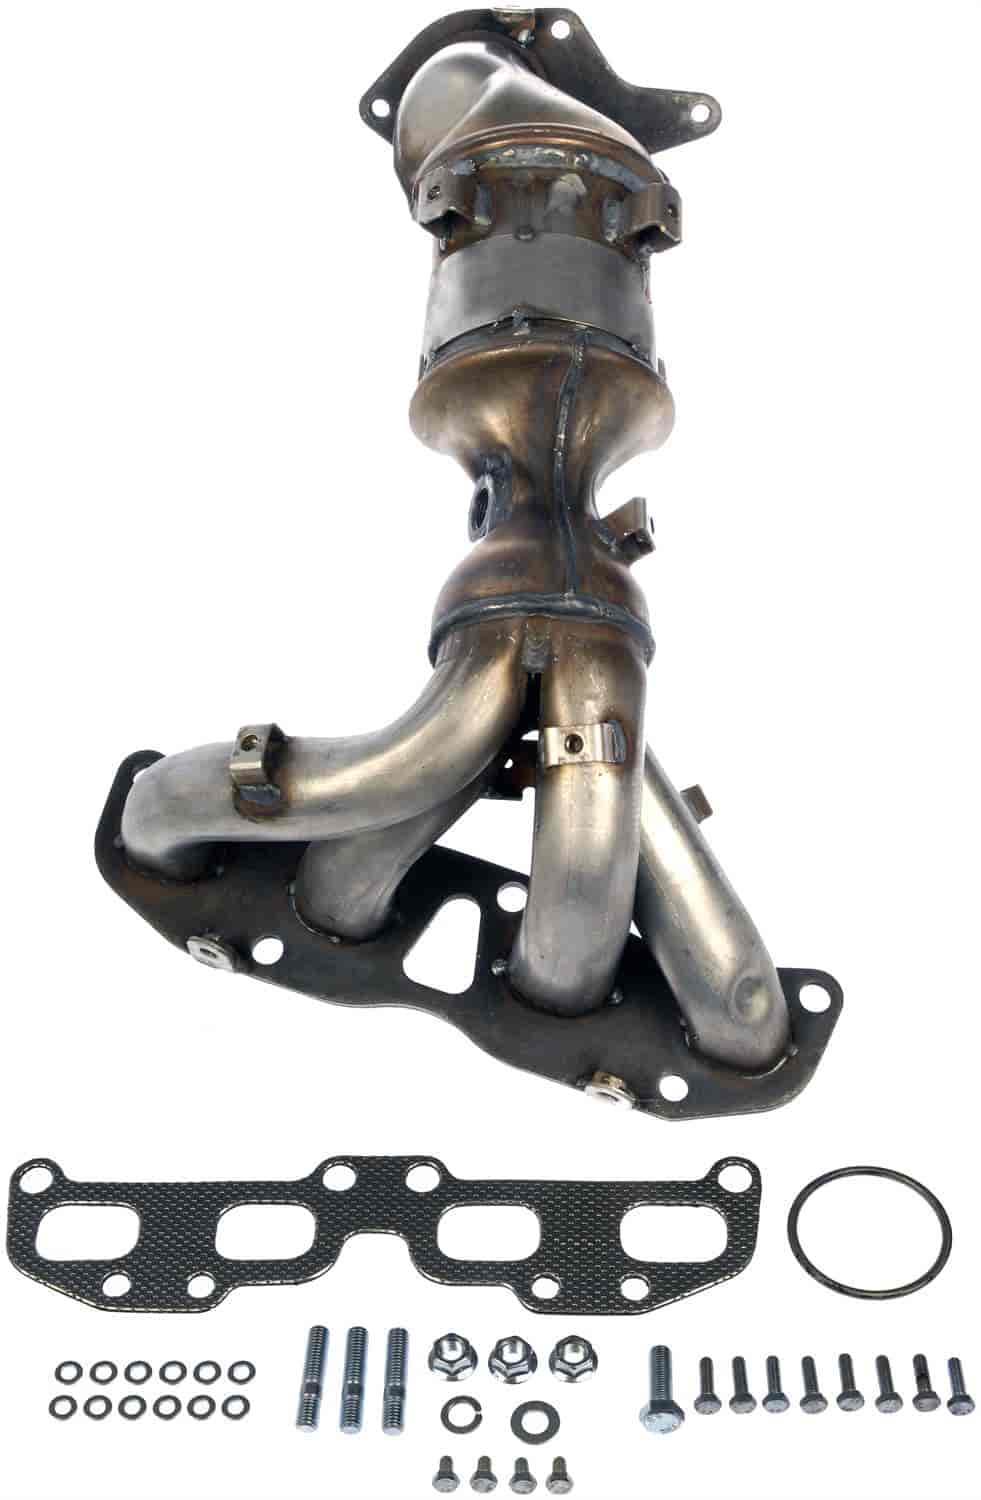 Integrated Exhaust Manifold - Tubular - Includes Gasket Hardware